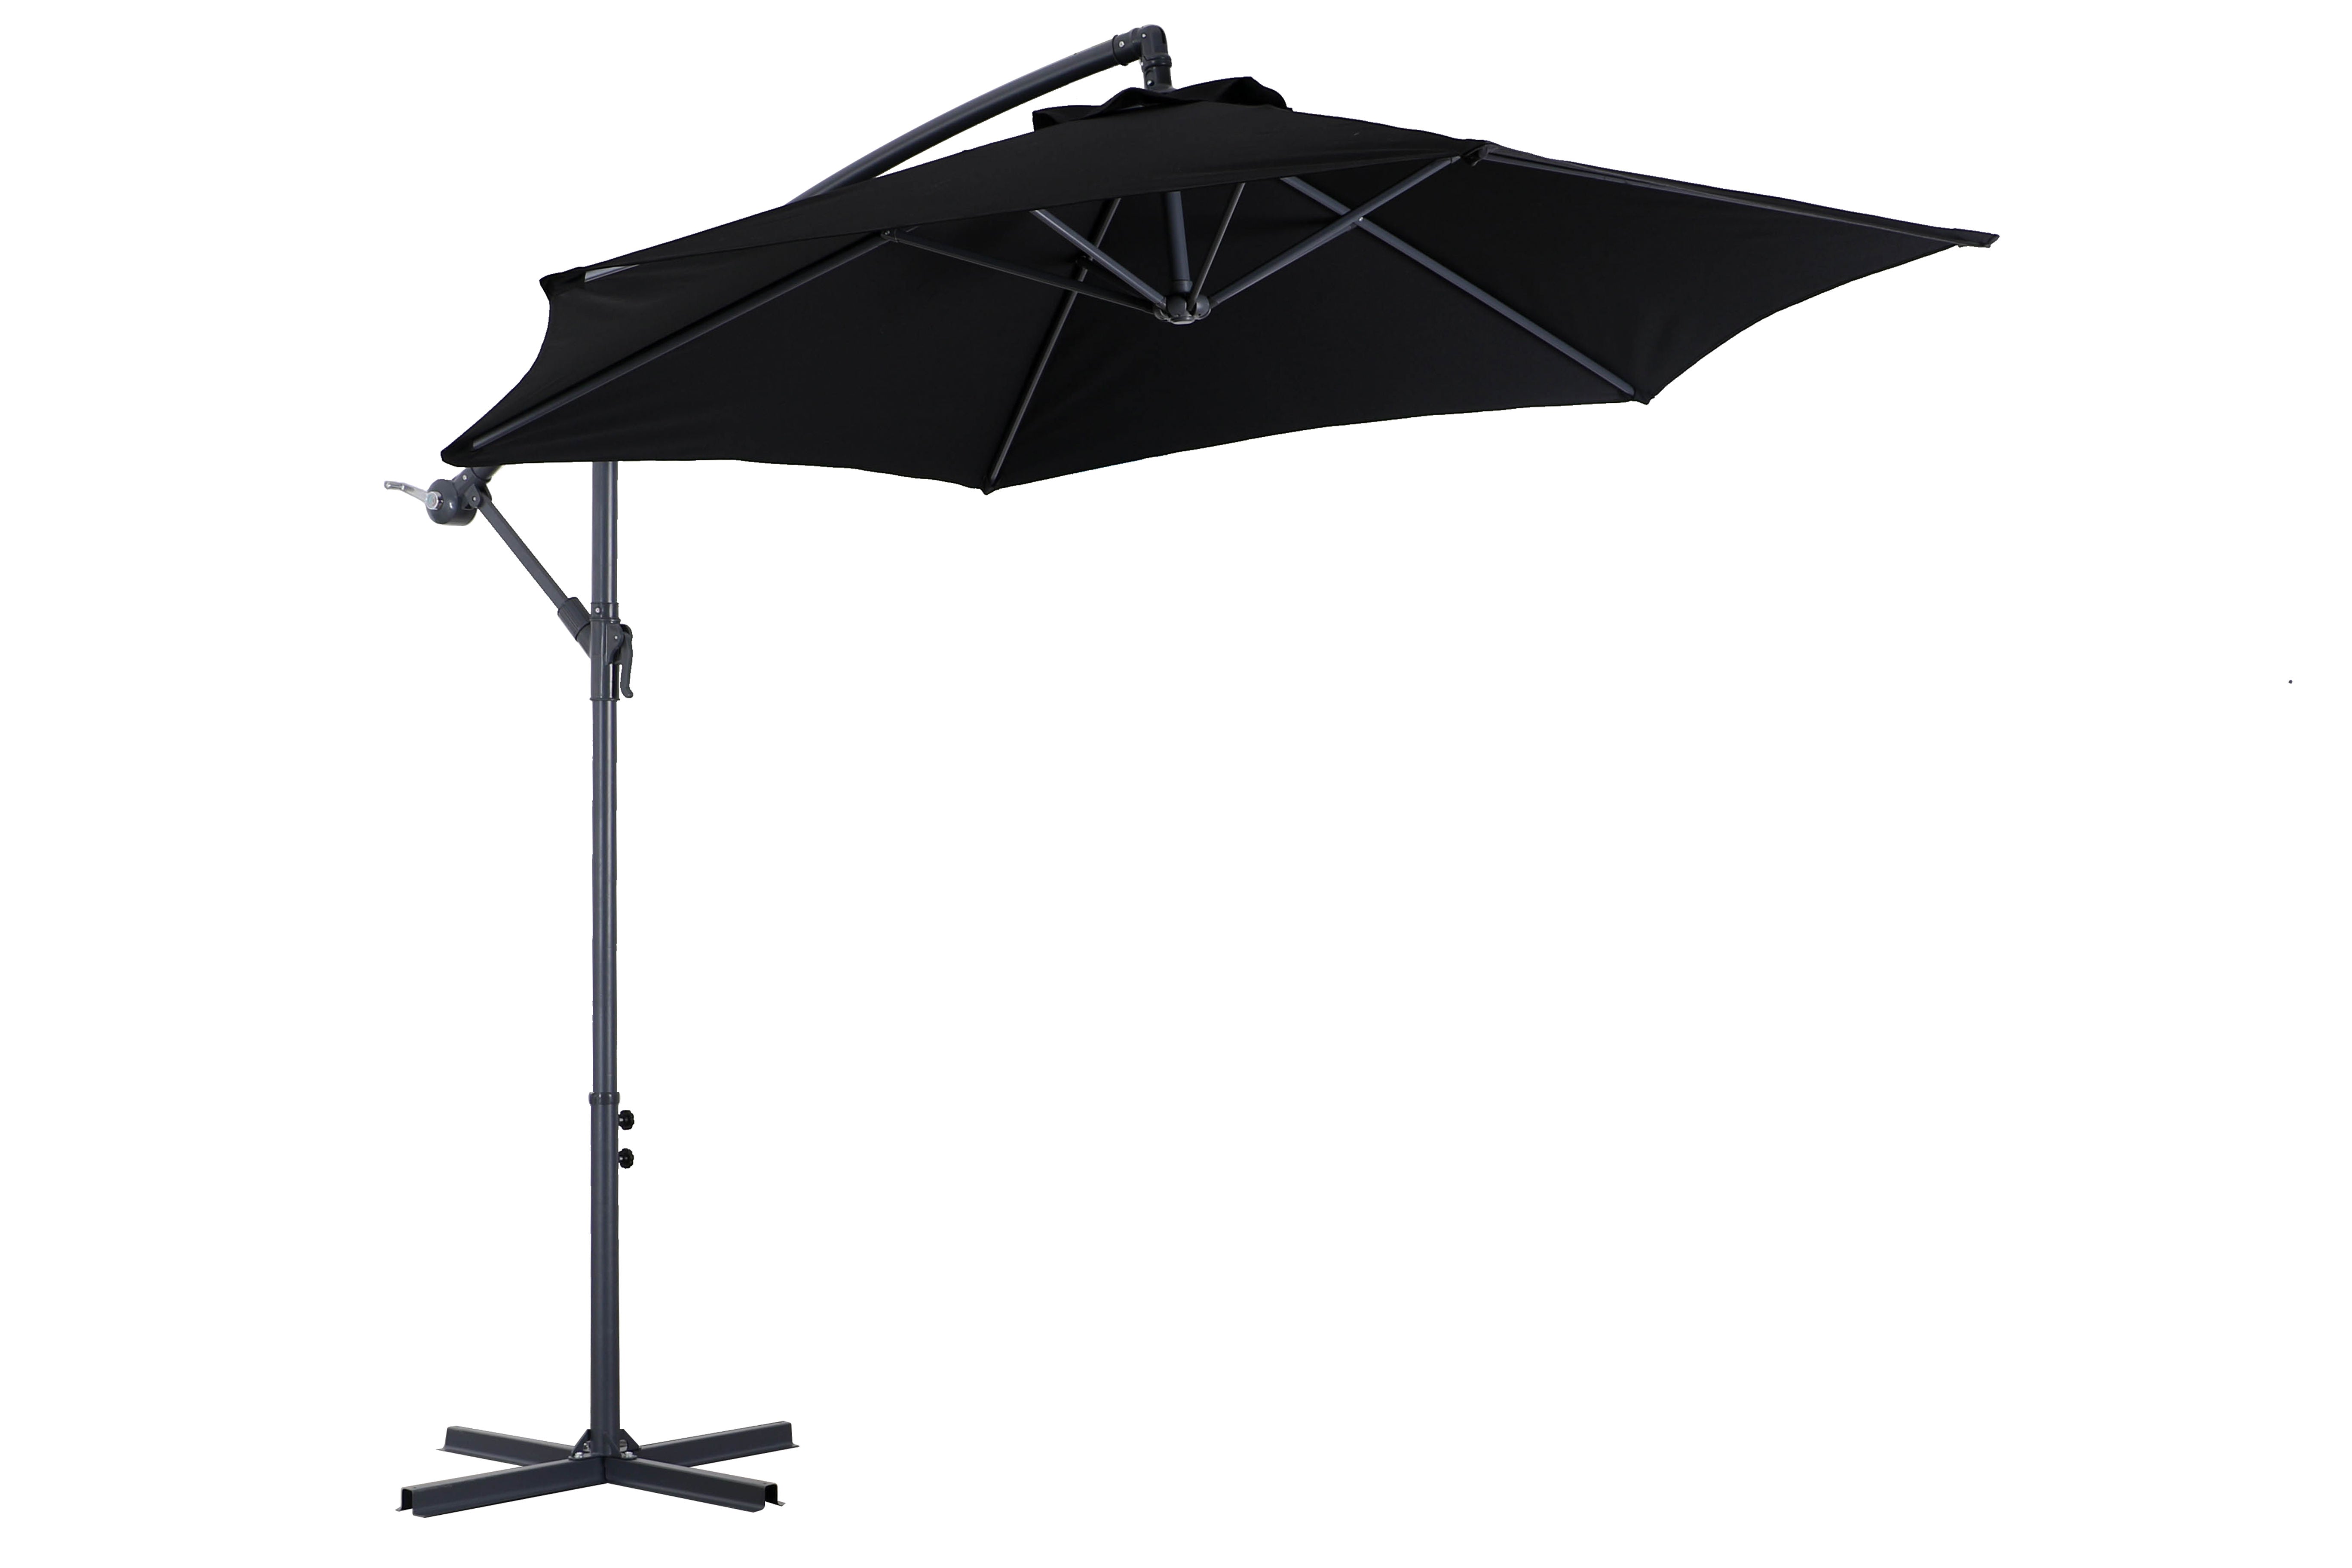 PatioZone 10' Tilting Offset Umbrella in UV-Protected Polyester (PZ-0501N) - Black